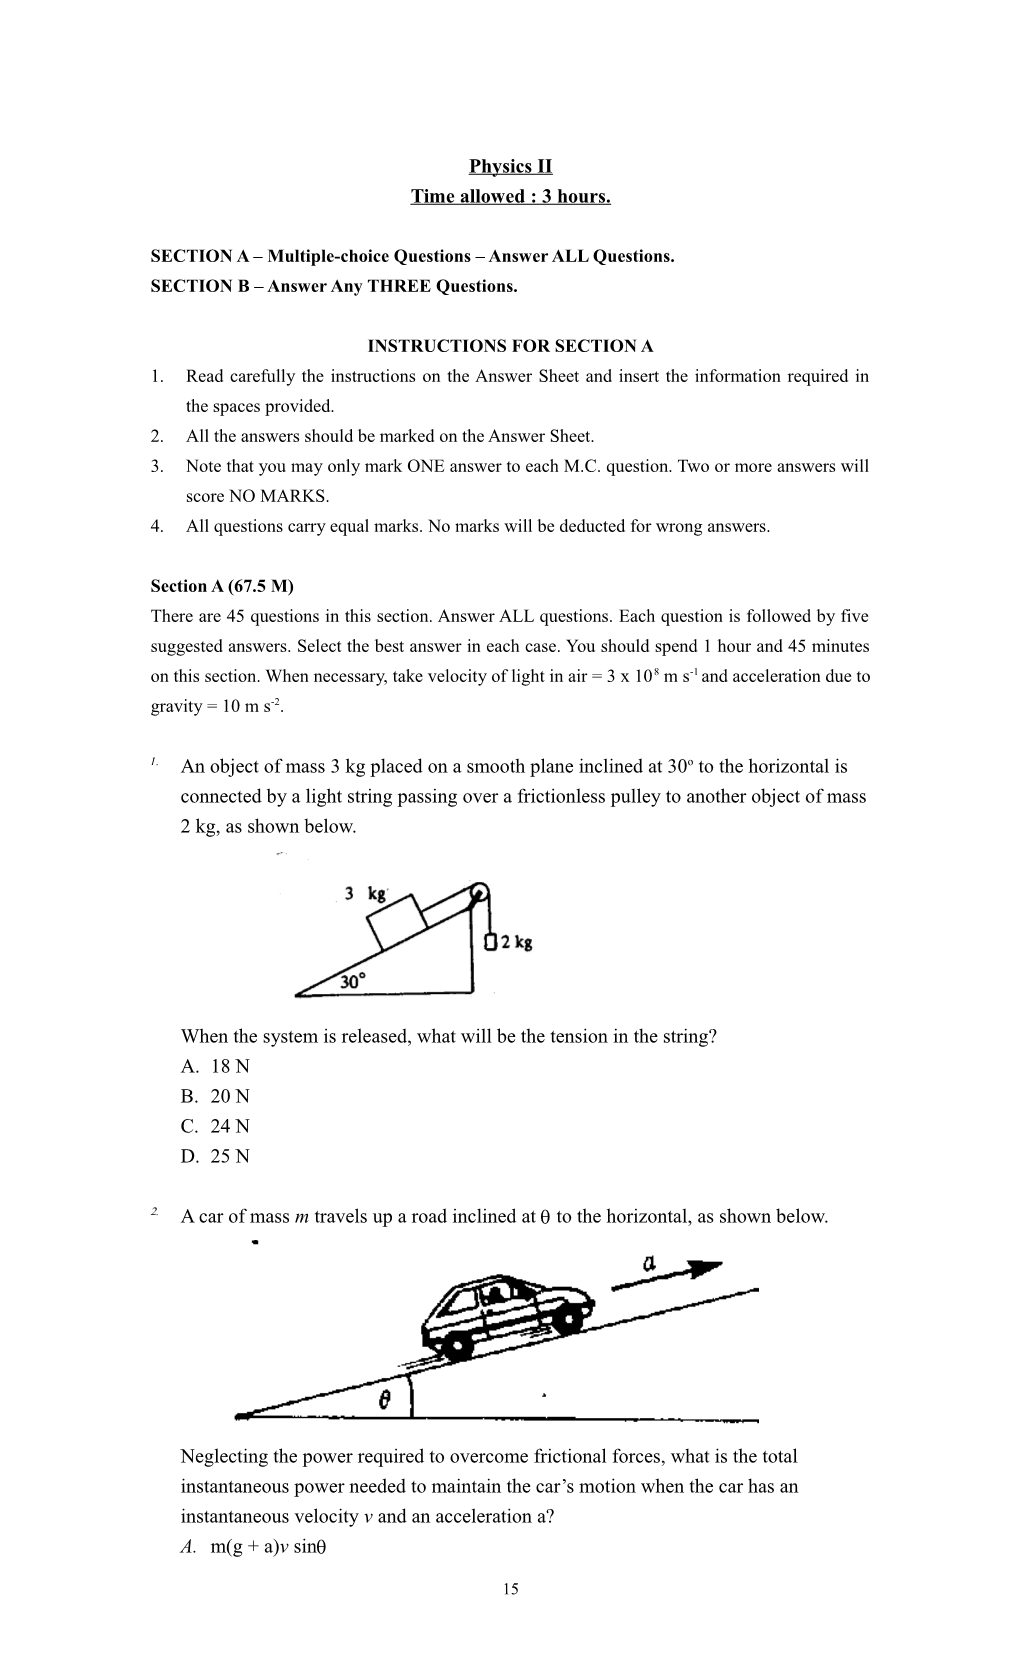 SECTION a Multiple-Choice Questions Answer ALL Questions